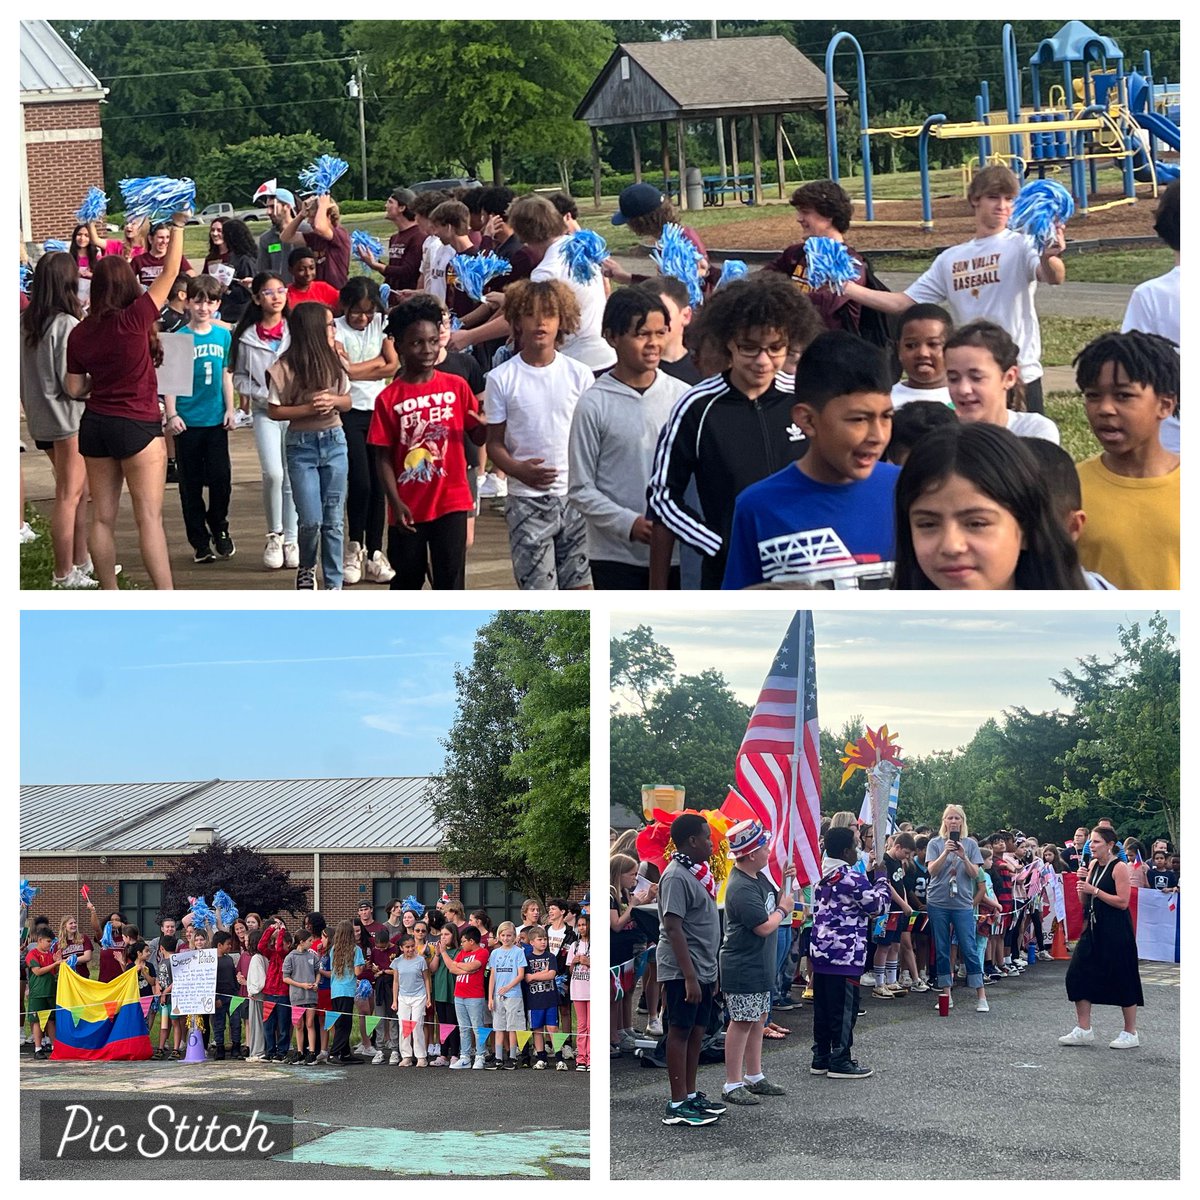 Today was our EOG Olympic Games Closing Ceremony @ShilohValleyES! Students have worked hard to prepare for EOGs and celebrated as a school with SVHS athletes. @SunValleyHSNC @AGHoulihan @Renee_McKinnon1 @SVHS_Athletics1